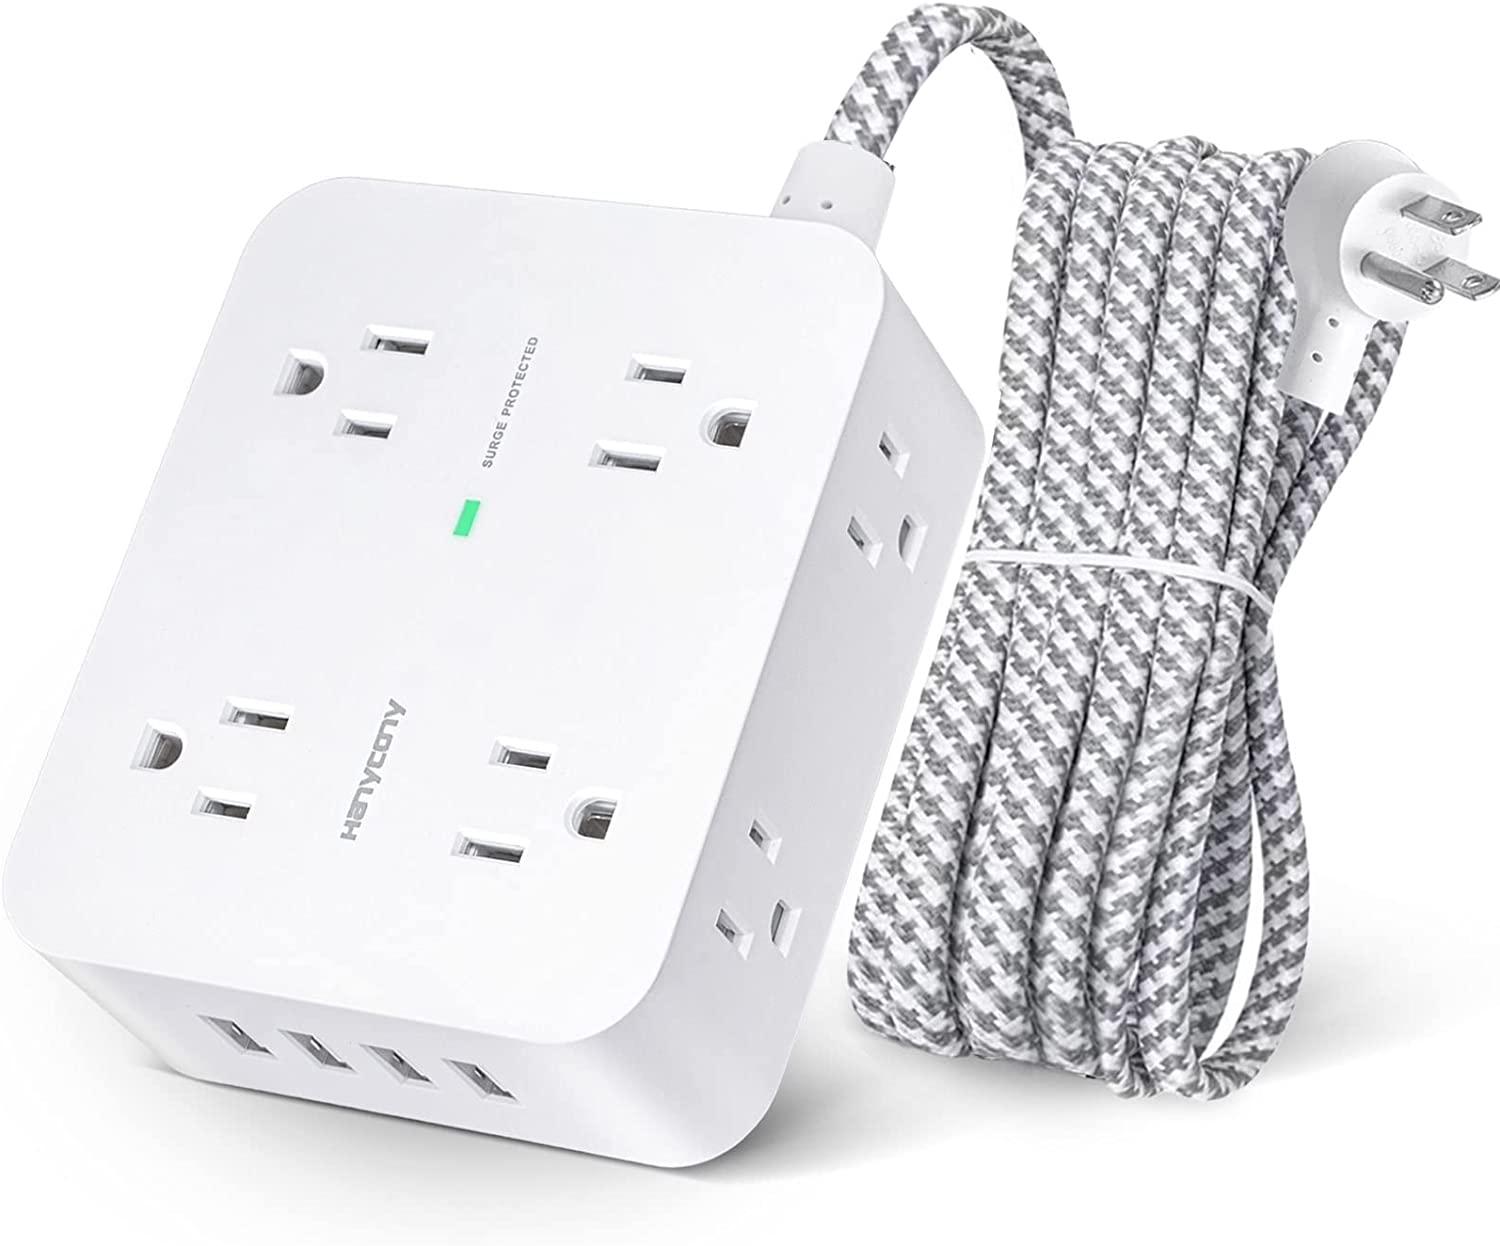 8 Outlet 4 USB Surge Protector Power Strip for $13.59